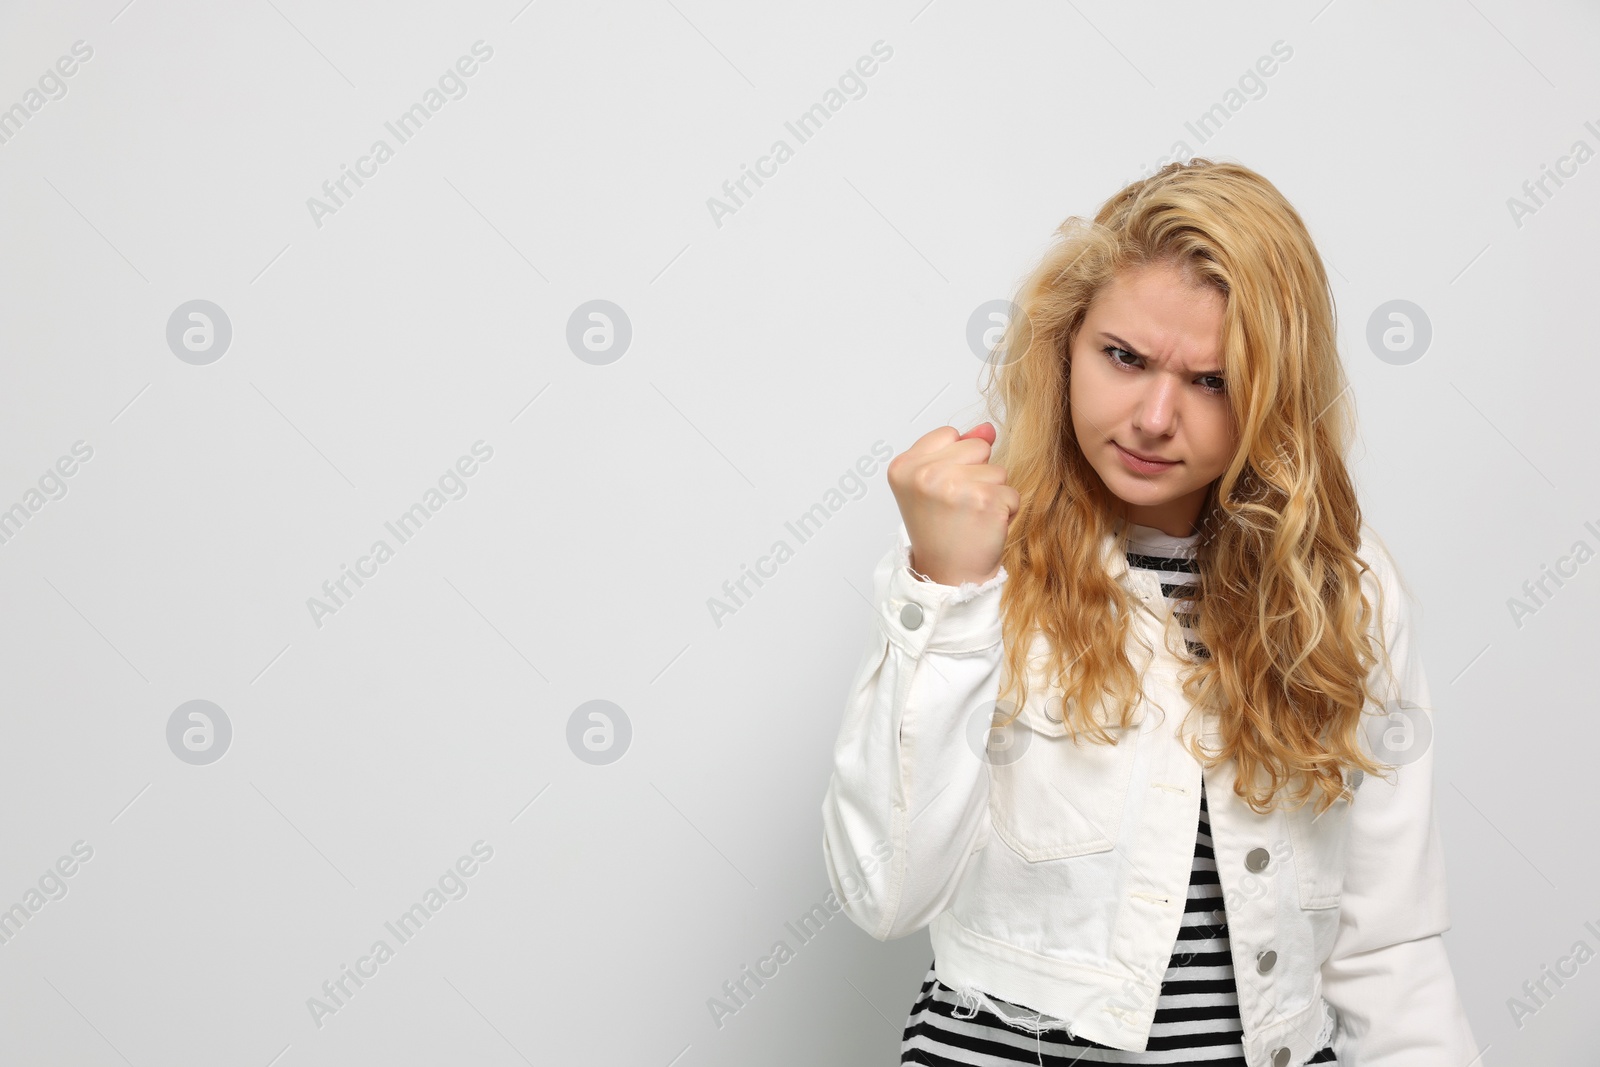 Photo of Aggressive young woman showing fist on white background. Space for text